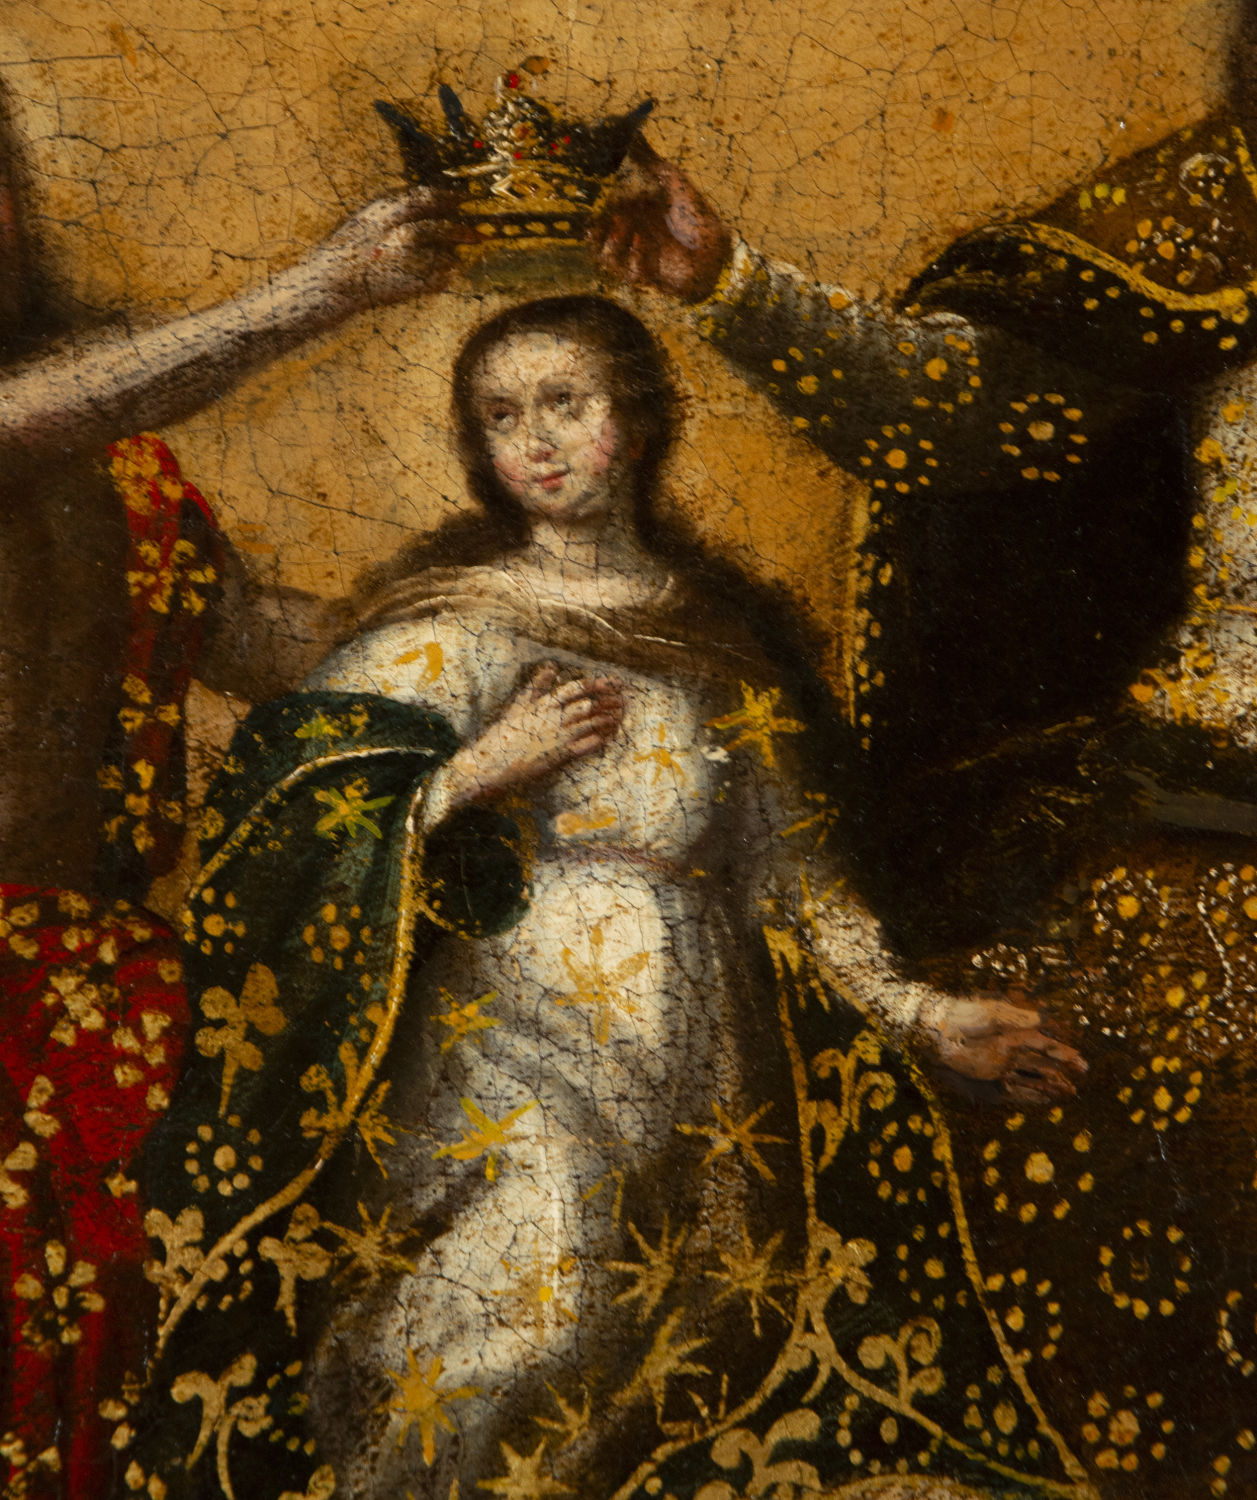 Exquisite Coronation of Mary, 18th century Spanish colonial school of Quito, present-day Ecuador - Image 6 of 12